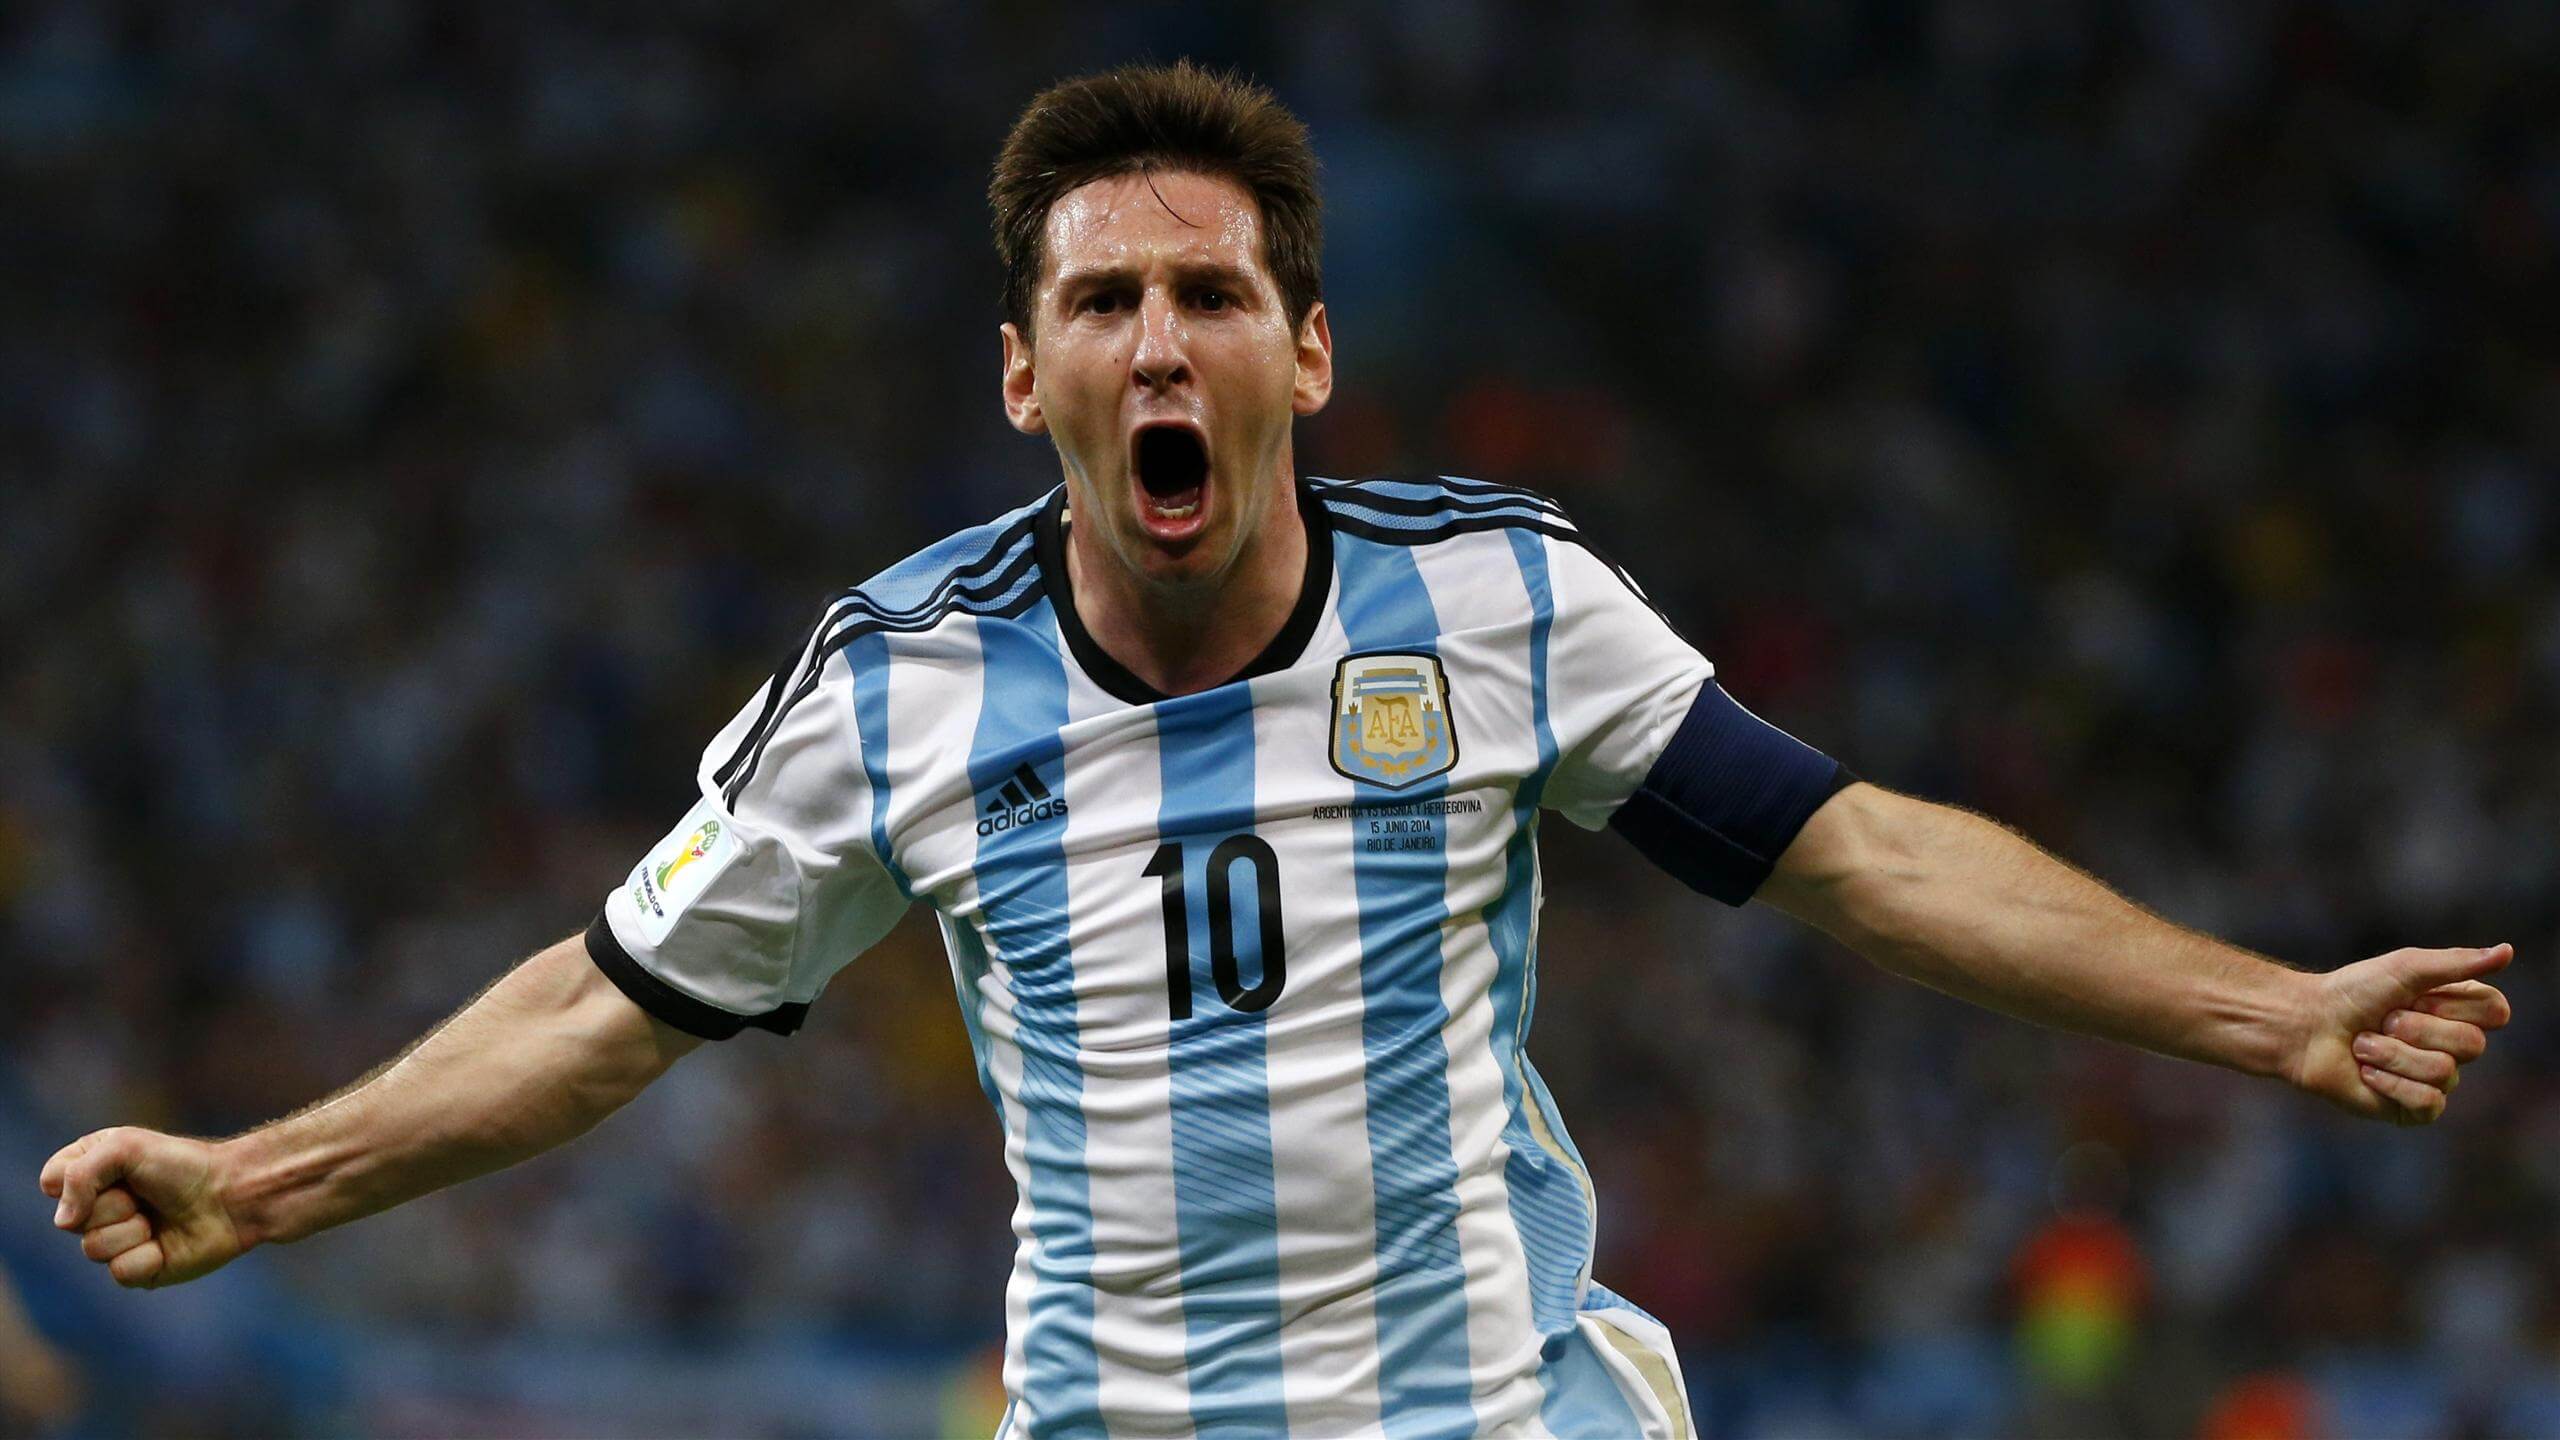 Lionel Messi Hd Wallpapers Images Photos In Barcelona